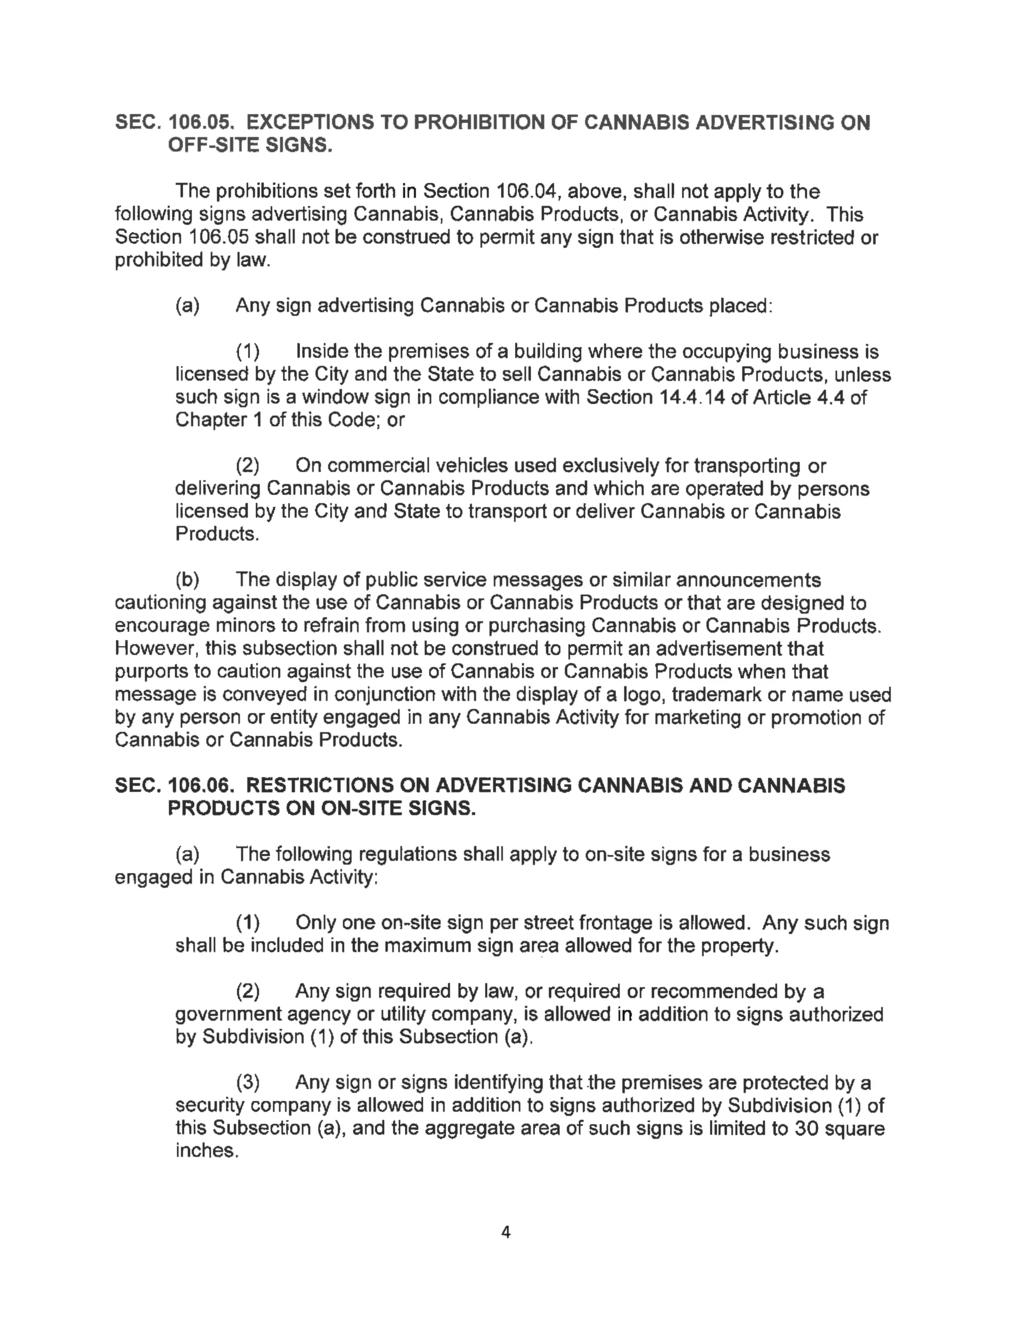 SEC. 106.05. EXCEPTIONS TO PROHIBITION OF CANNABIS ADVERTISING ON OFF-SITE SIGNS. The prohibitions set forth in Section 106.